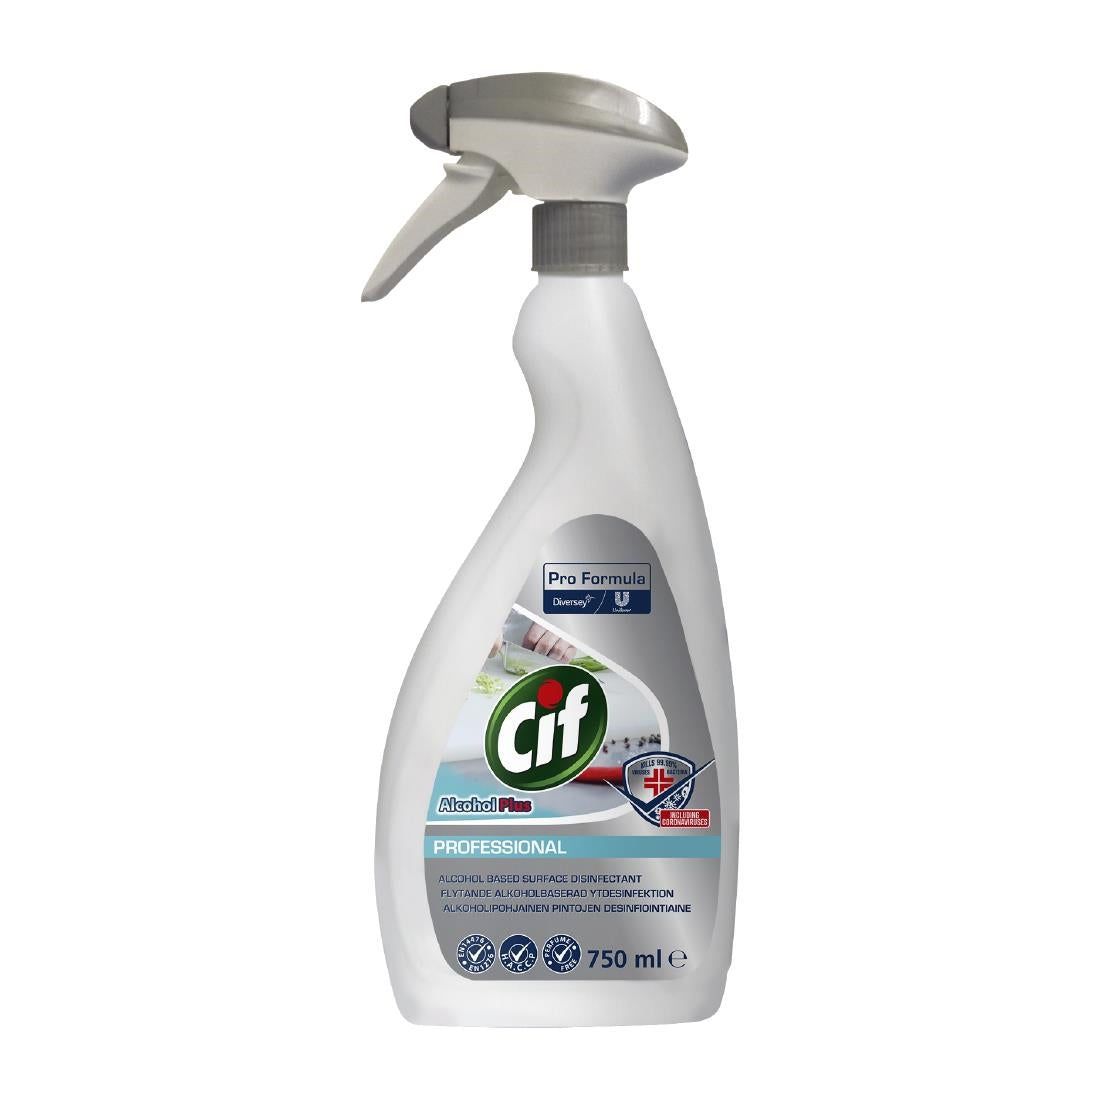 CX871 Cif Pro Formula Alcohol Plus Surface Disinfectant Ready To Use 750ml JD Catering Equipment Solutions Ltd